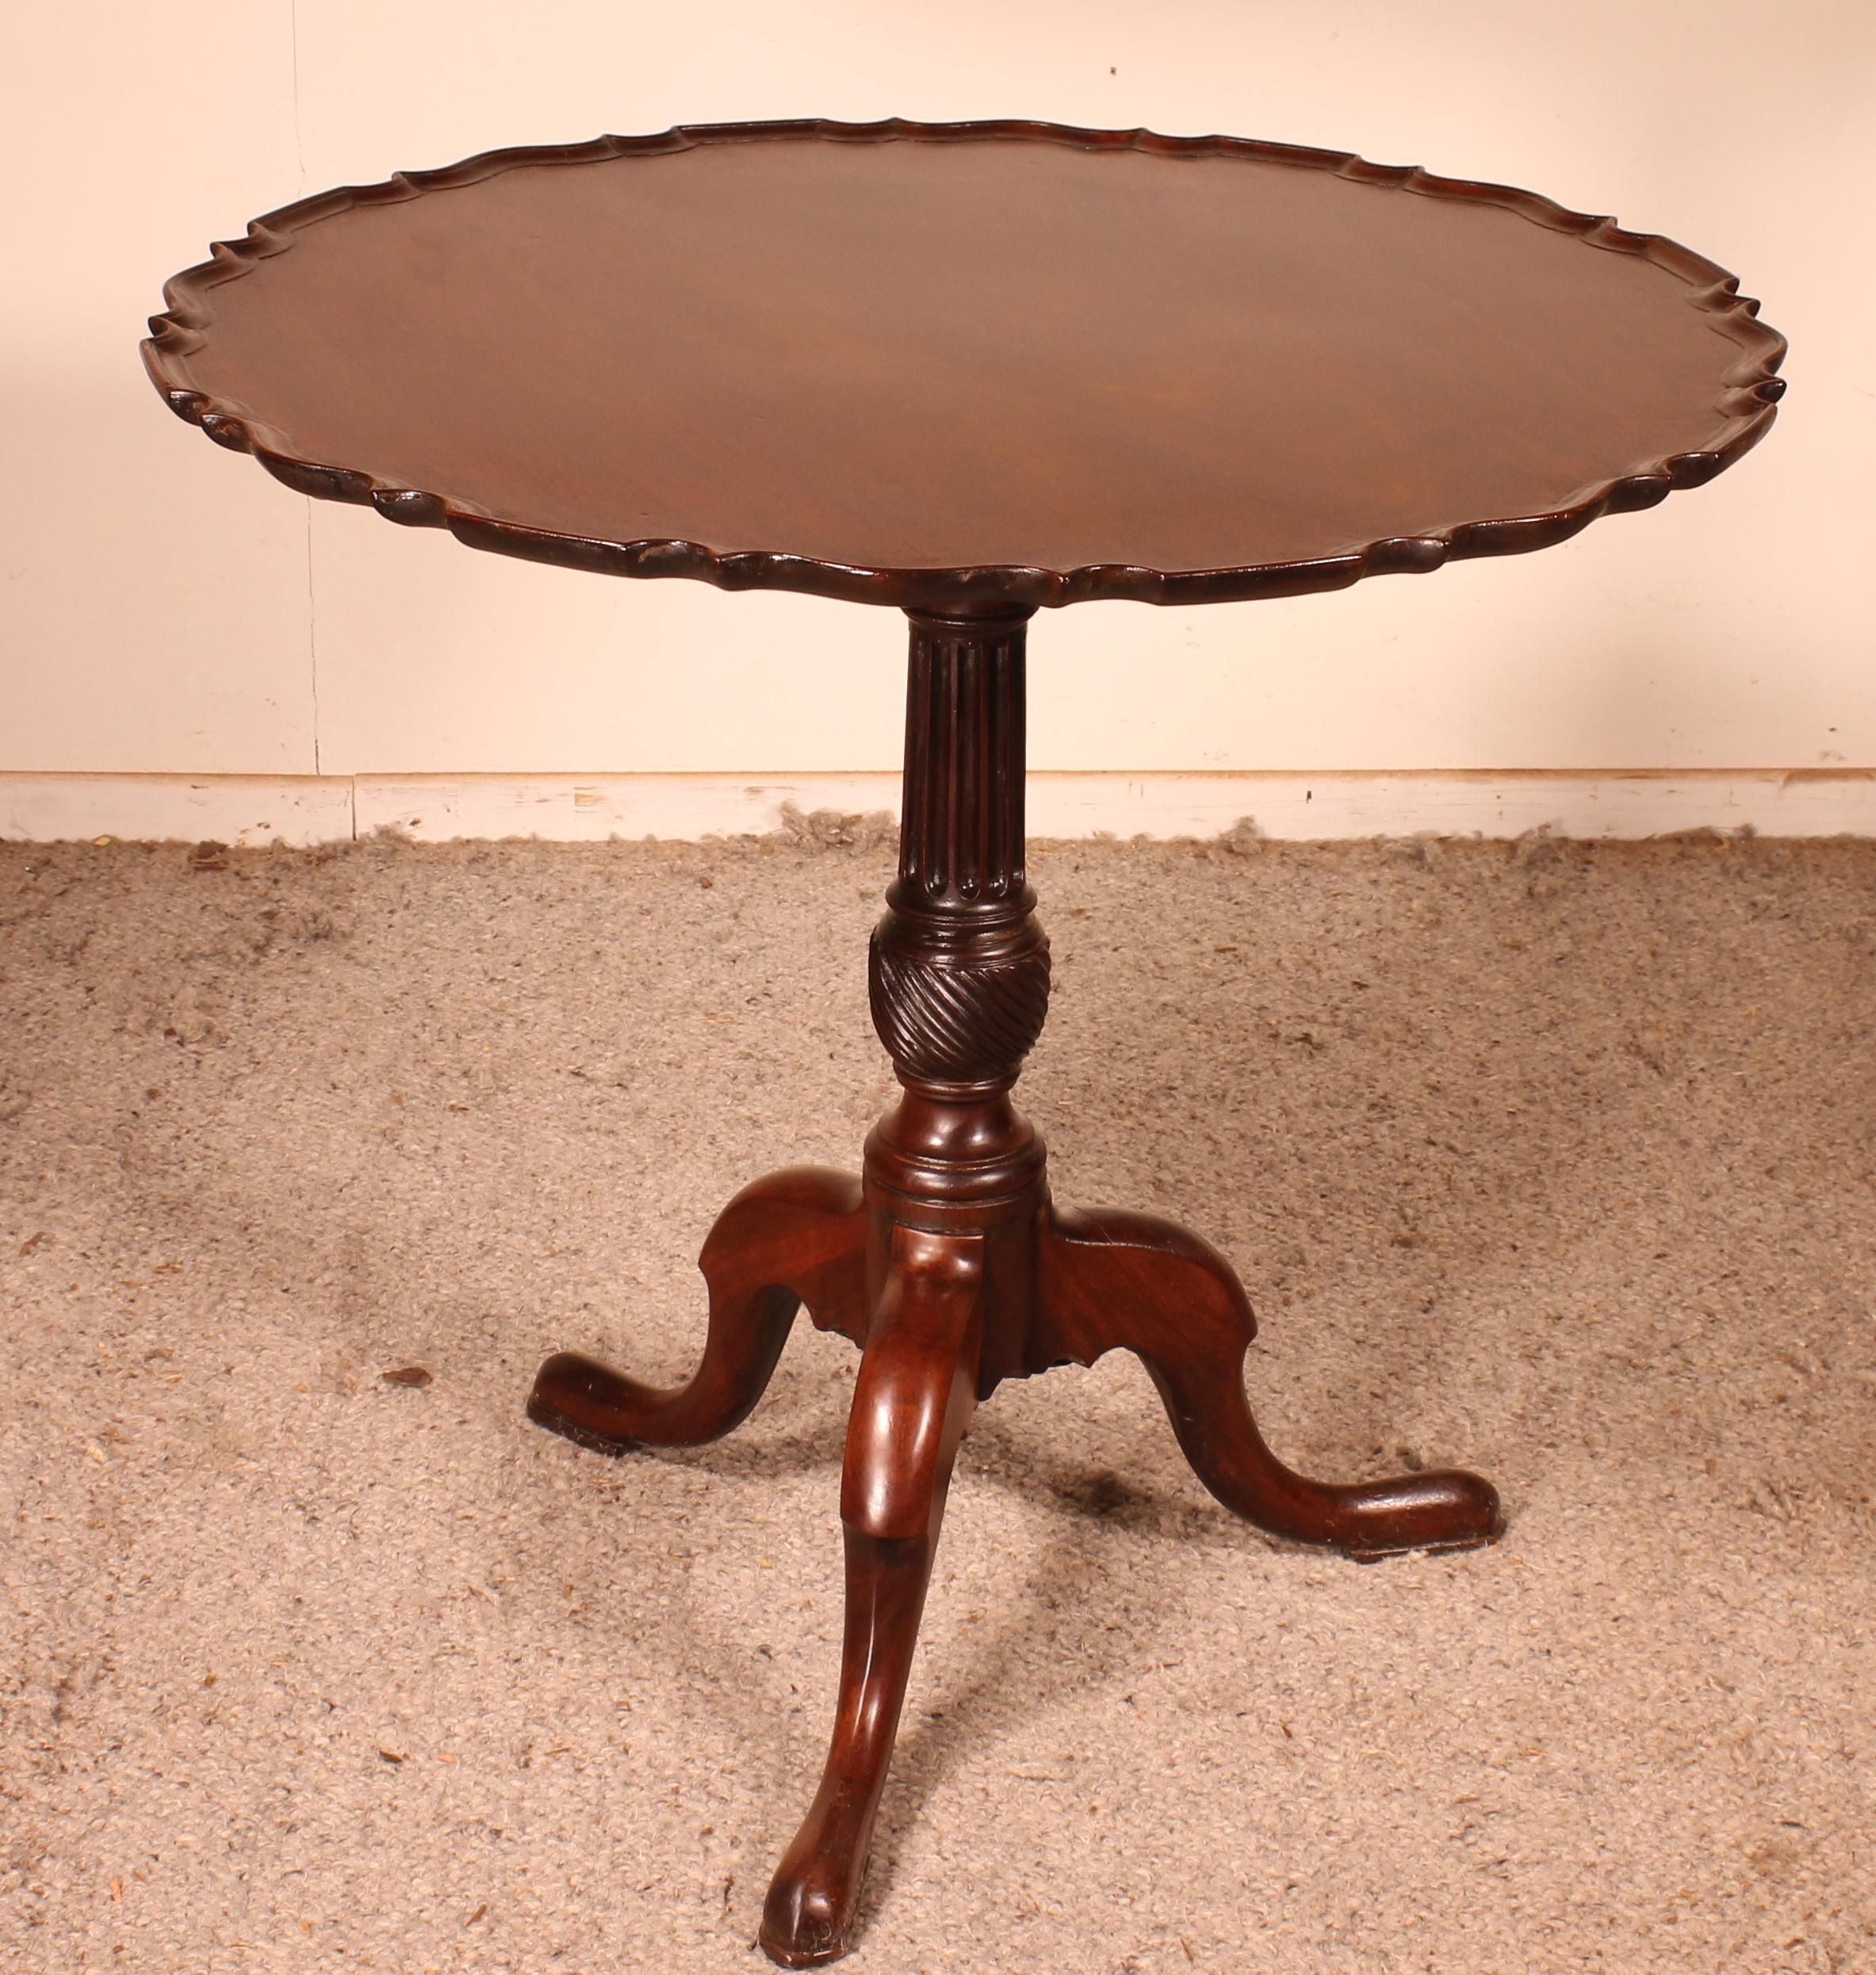 Elegant late 18th century English tripod table in solid mahogany.

Superb one piece solid mahogany top with a diameter of 78cm. Superb work on the table top which makes it exceptional and rare.

Tripod base with a very beautiful twisted